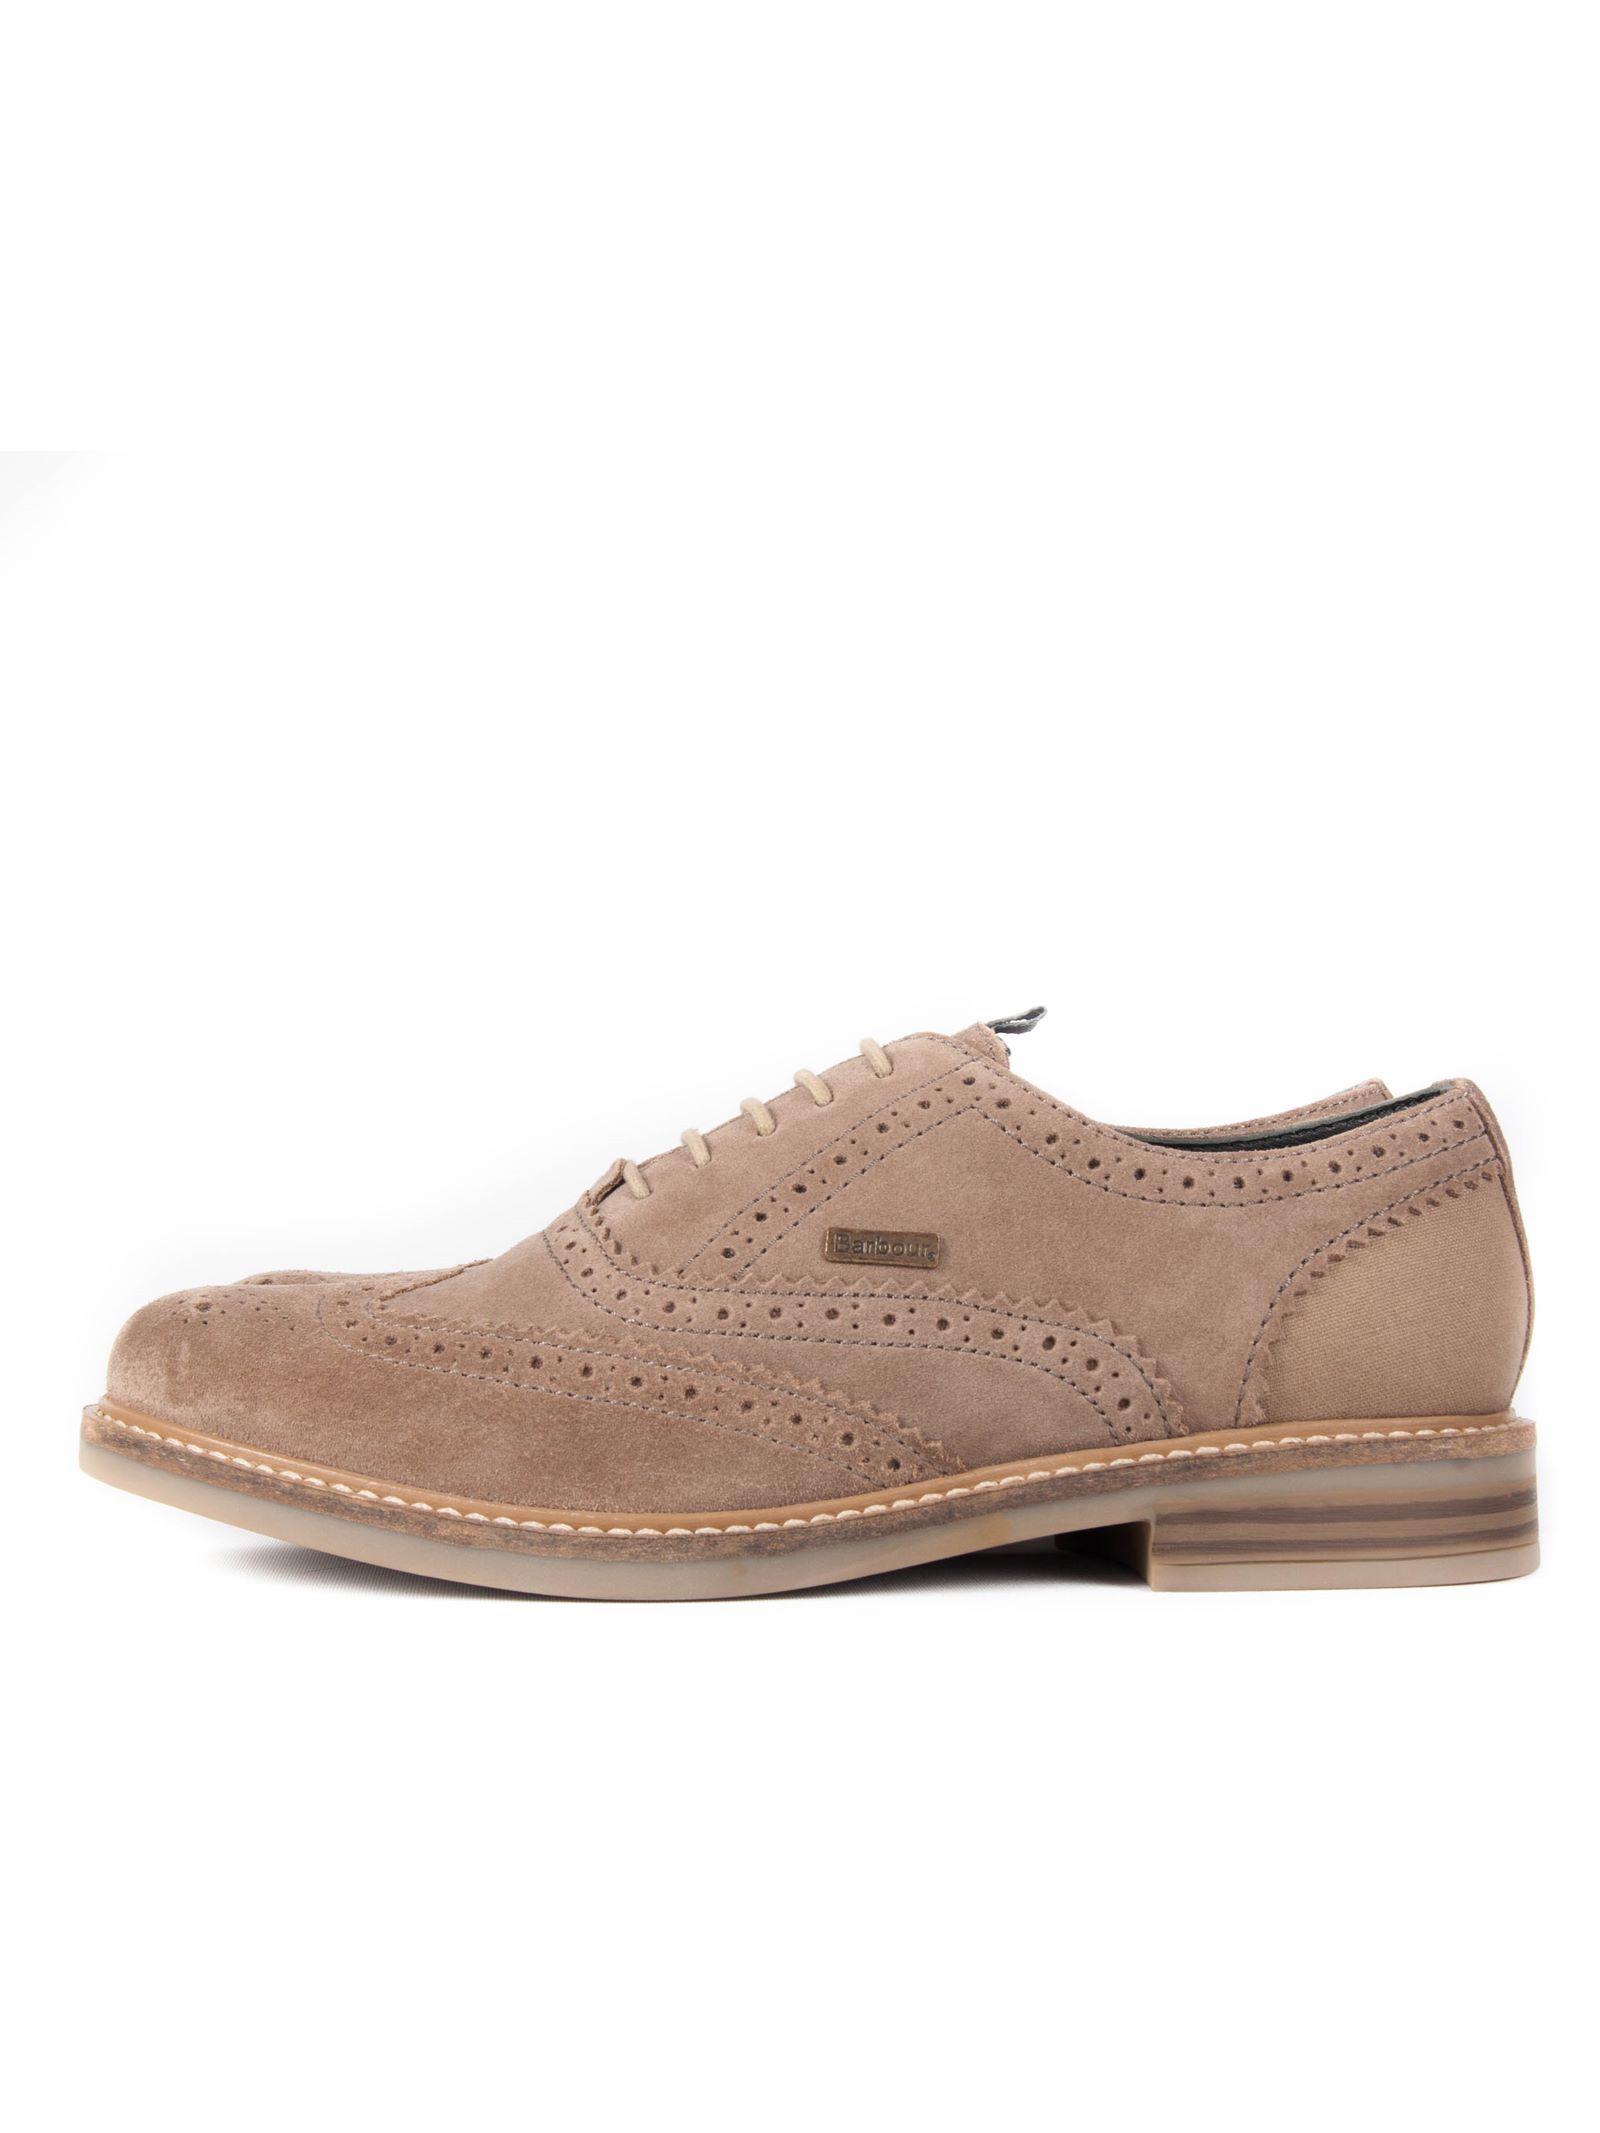 Barbour Redcar Oxford Brogue in Taupe suede | Dapper Street